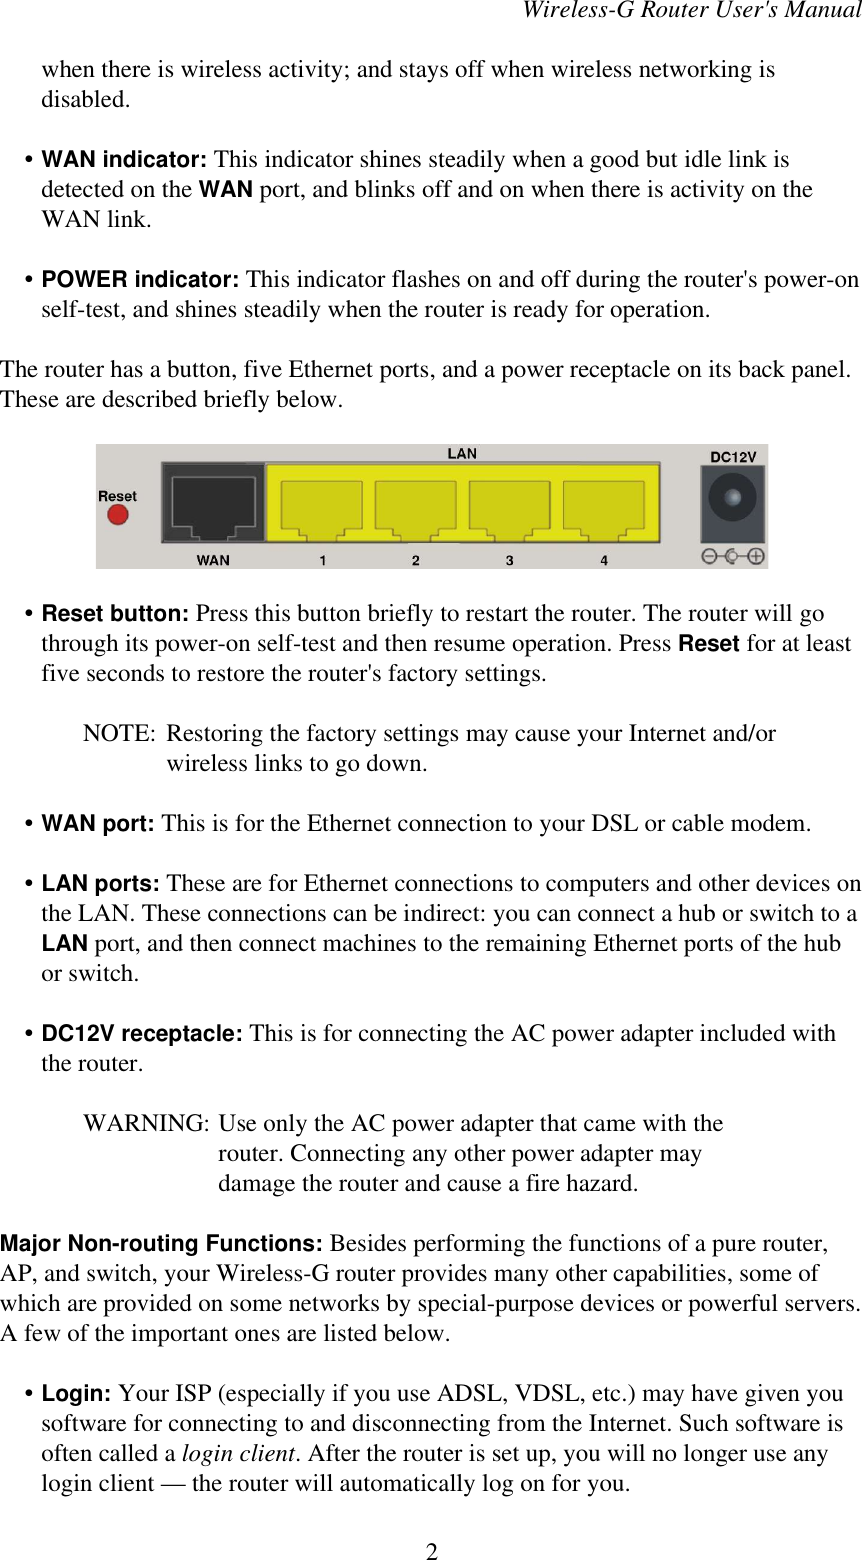 Wireless-G Router User&apos;s Manualwhen there is wireless activity; and stays off when wireless networking isdisabled.    • WAN indicator: This indicator shines steadily when a good but idle link isdetected on the WAN port, and blinks off and on when there is activity on theWAN link.    • POWER indicator: This indicator flashes on and off during the router&apos;s power-onself-test, and shines steadily when the router is ready for operation.The router has a button, five Ethernet ports, and a power receptacle on its back panel.These are described briefly below.    • Reset button: Press this button briefly to restart the router. The router will gothrough its power-on self-test and then resume operation. Press Reset for at leastfive seconds to restore the router&apos;s factory settings.NOTE: Restoring the factory settings may cause your Internet and/orwireless links to go down.    • WAN port: This is for the Ethernet connection to your DSL or cable modem.    • LAN ports: These are for Ethernet connections to computers and other devices onthe LAN. These connections can be indirect: you can connect a hub or switch to aLAN port, and then connect machines to the remaining Ethernet ports of the hubor switch.    • DC12V receptacle: This is for connecting the AC power adapter included withthe router.WARNING: Use only the AC power adapter that came with therouter. Connecting any other power adapter maydamage the router and cause a fire hazard.Major Non-routing Functions: Besides performing the functions of a pure router,AP, and switch, your Wireless-G router provides many other capabilities, some ofwhich are provided on some networks by special-purpose devices or powerful servers.A few of the important ones are listed below.    • Login: Your ISP (especially if you use ADSL, VDSL, etc.) may have given yousoftware for connecting to and disconnecting from the Internet. Such software isoften called a login client. After the router is set up, you will no longer use anylogin client — the router will automatically log on for you.2